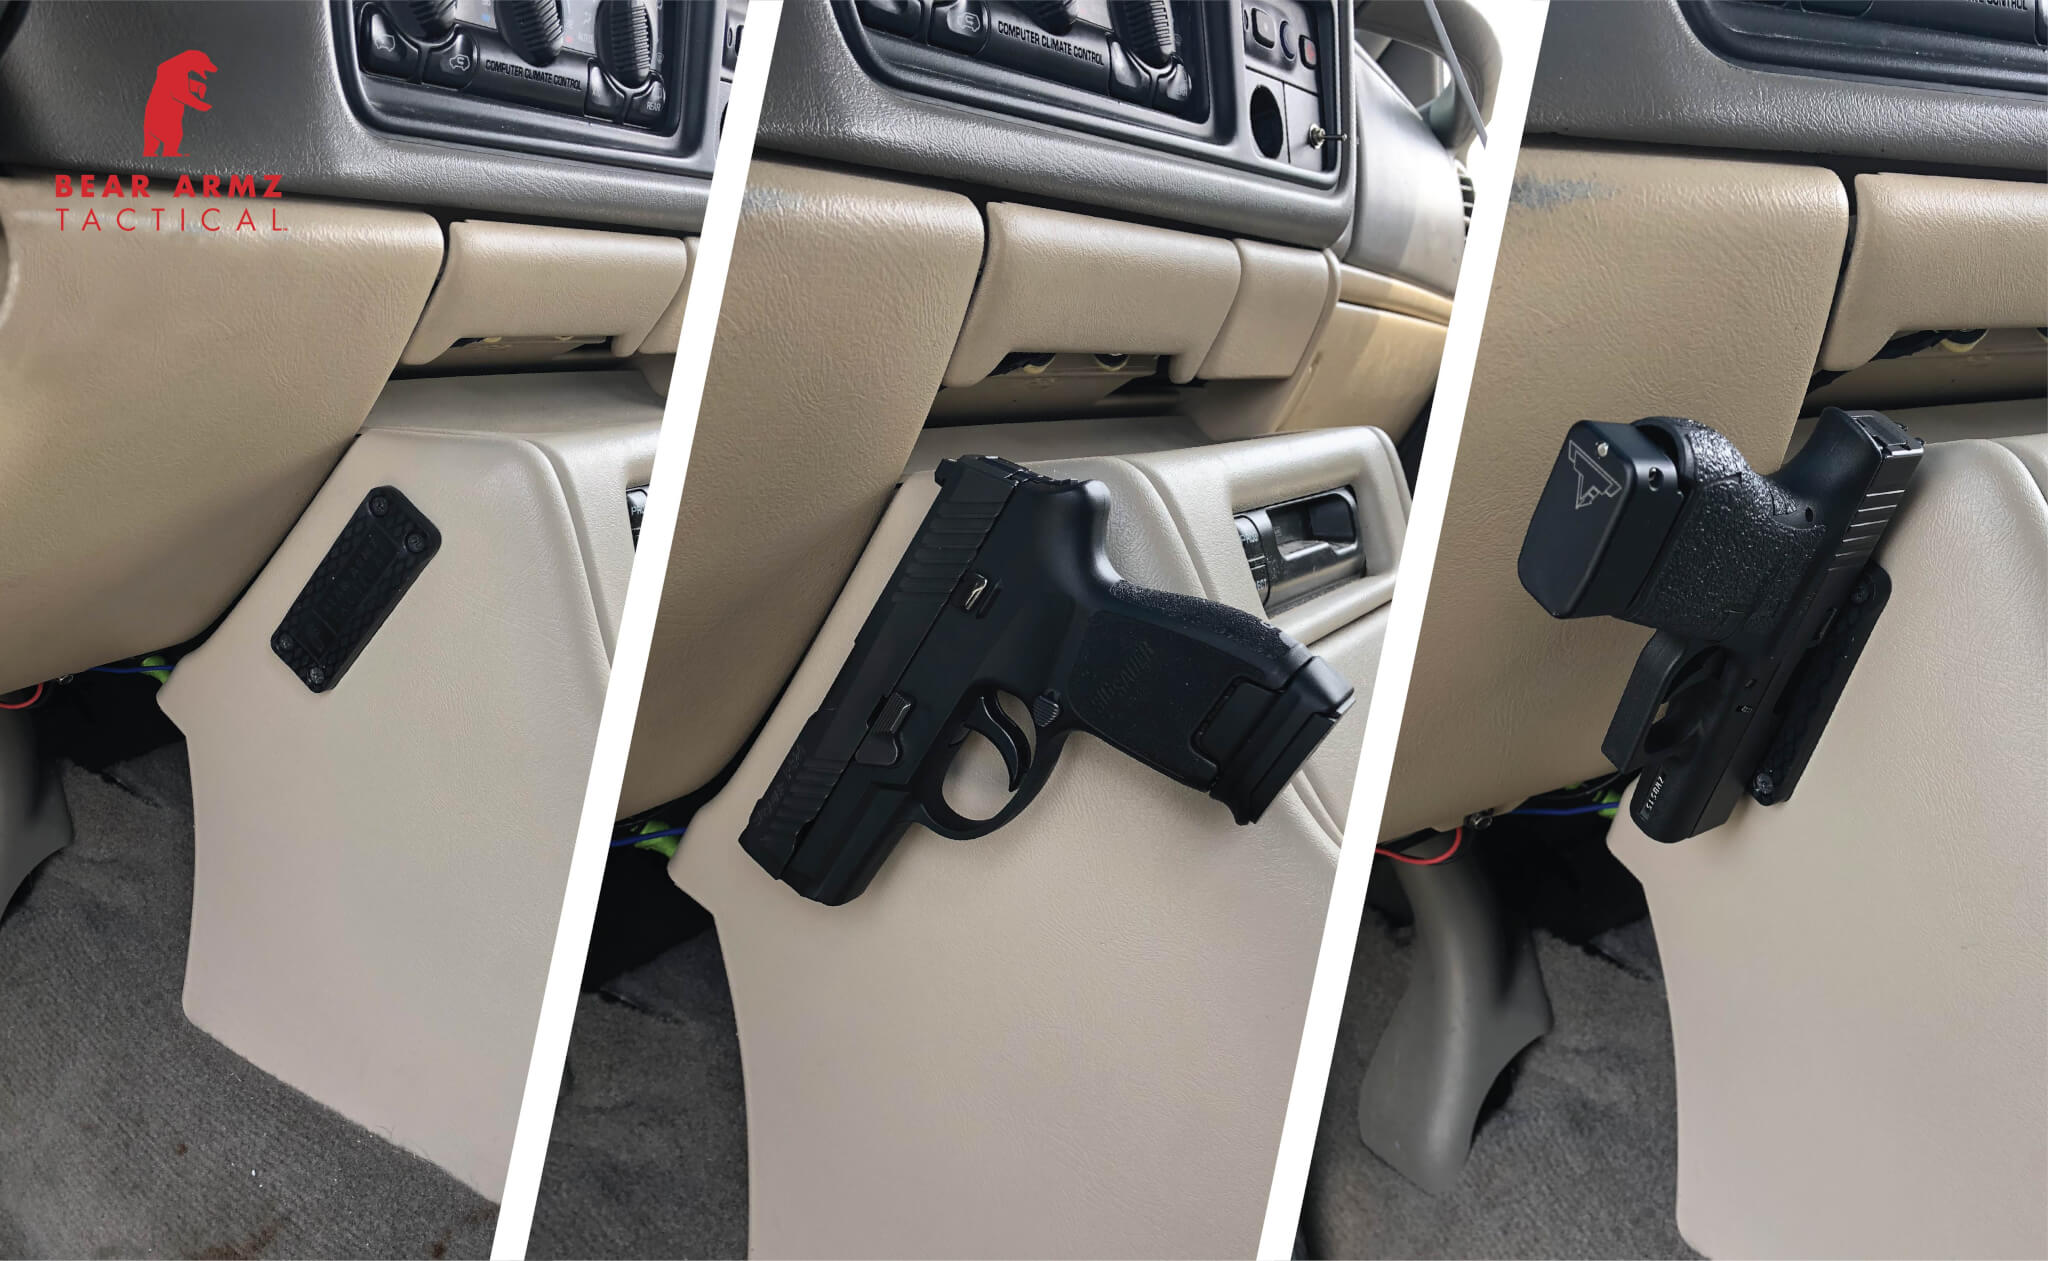 Truck or anywhere! Concealed Gun Magnet Mount Smith & Wesson Car 